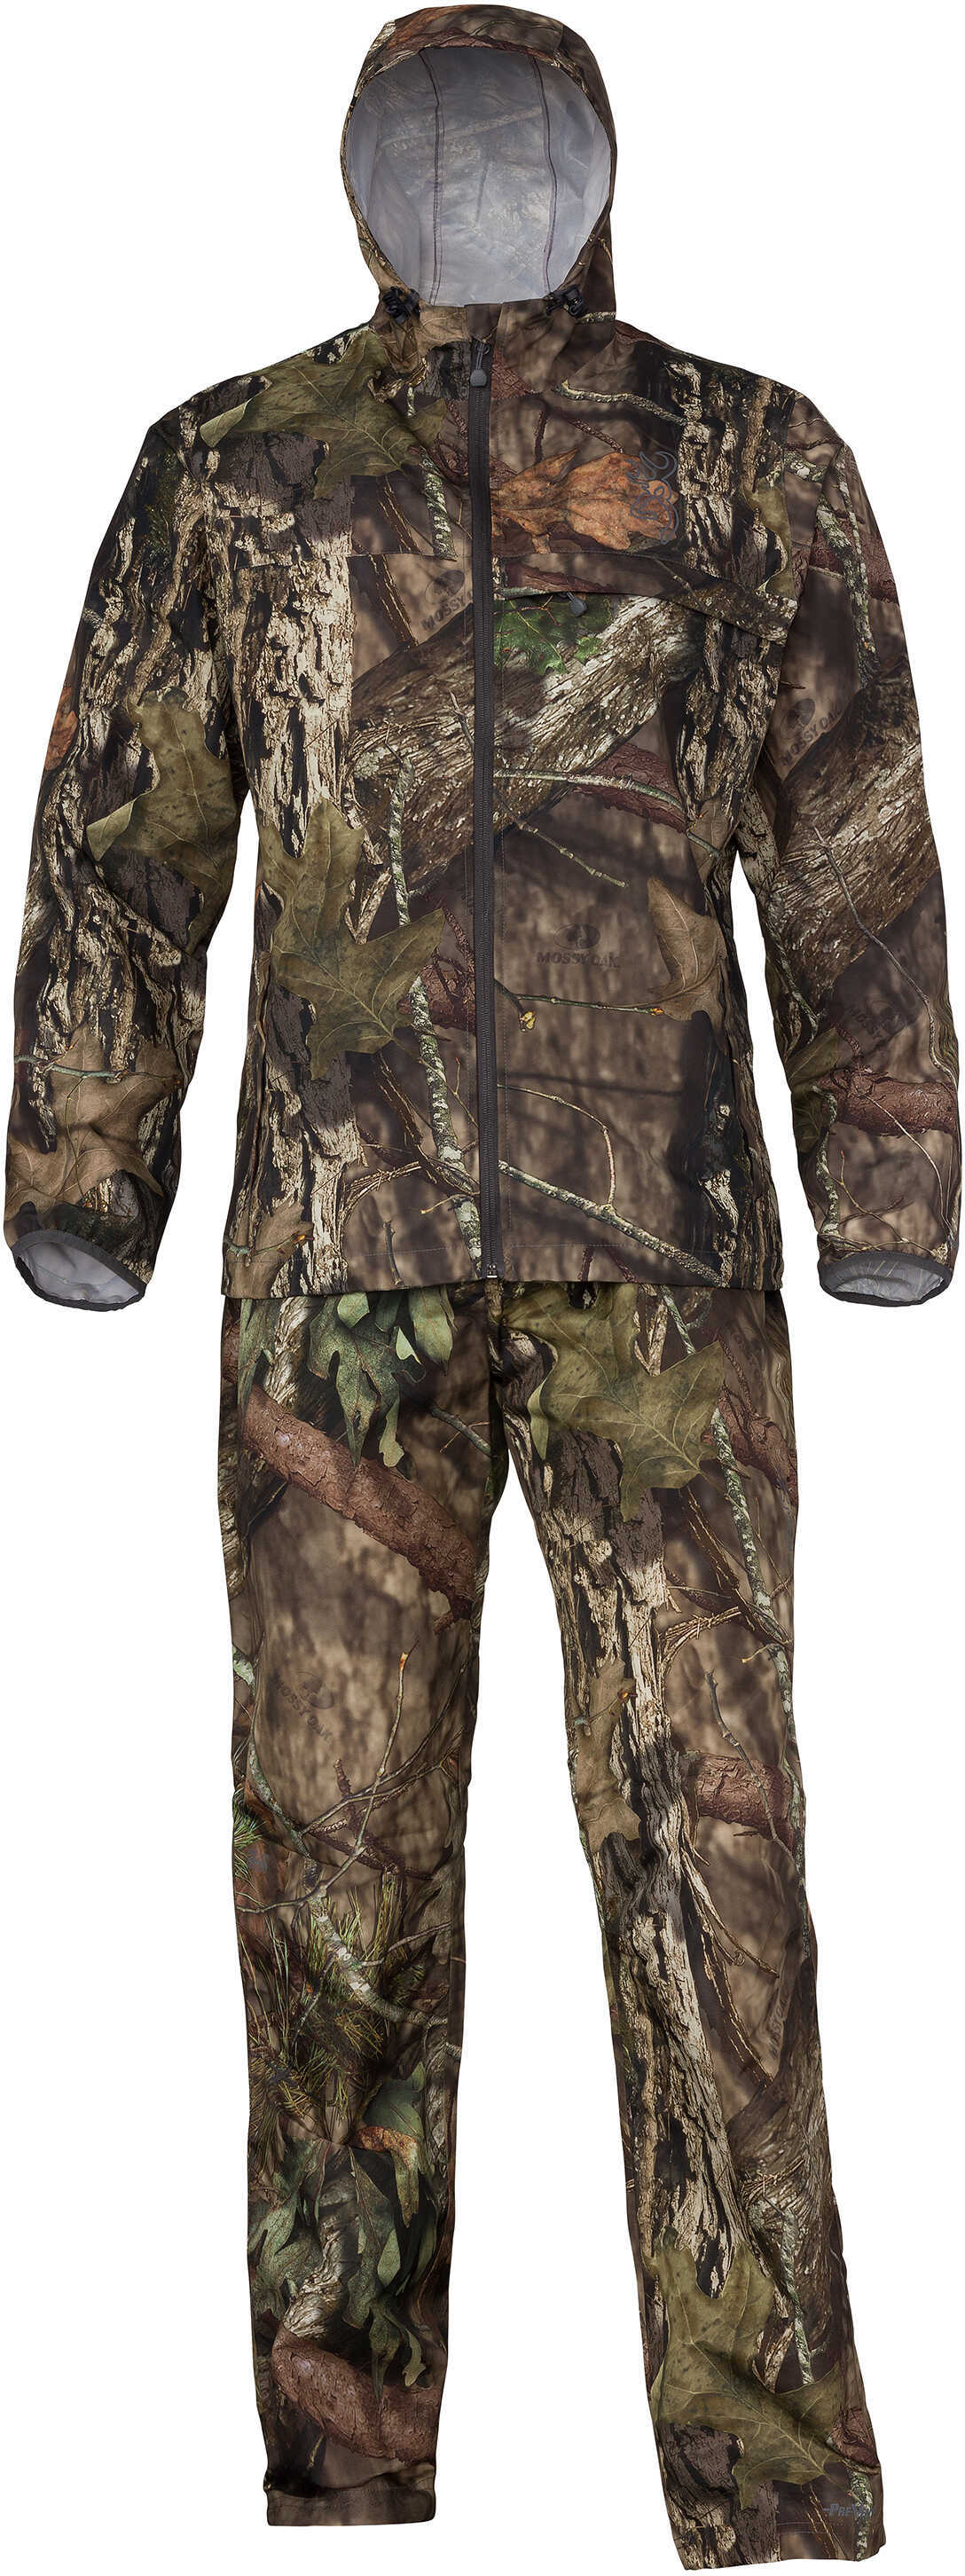 Browning Hell's Canyon CFS-WD Rain Suit Size Medium